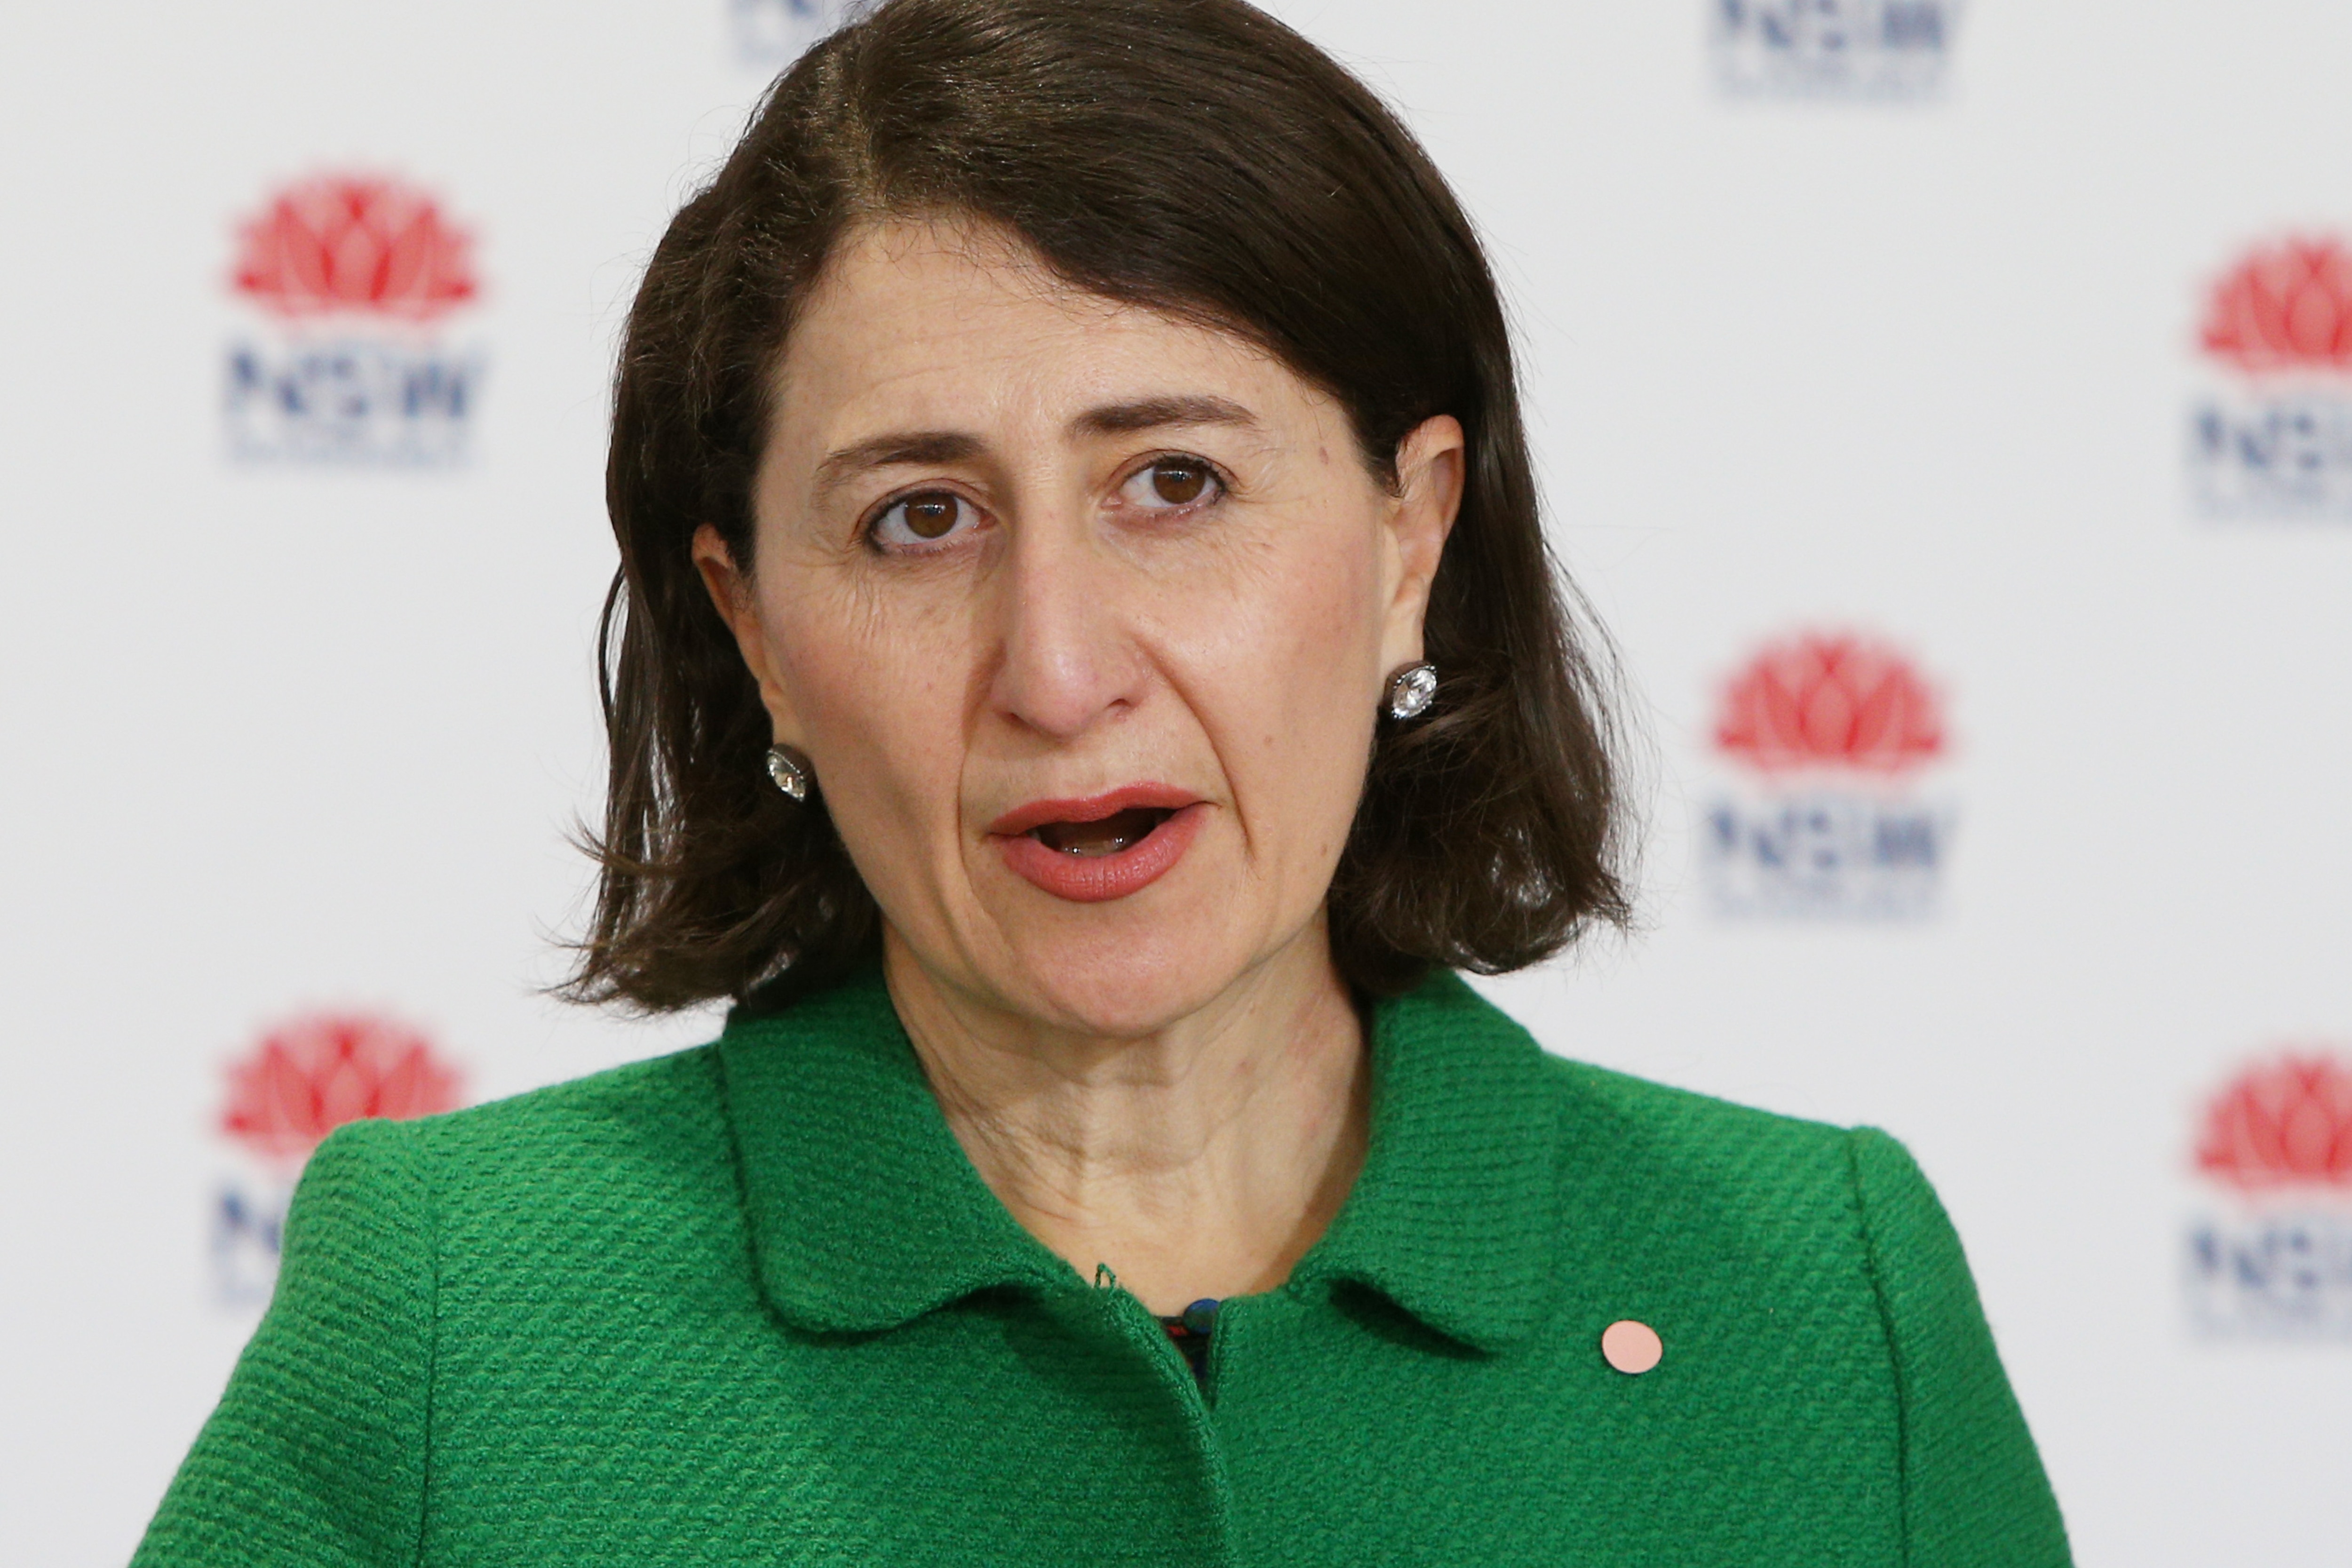 NSW Premier Gladys Berejiklian speaks to the media during a COVID-19 update and press conference in Sydney.